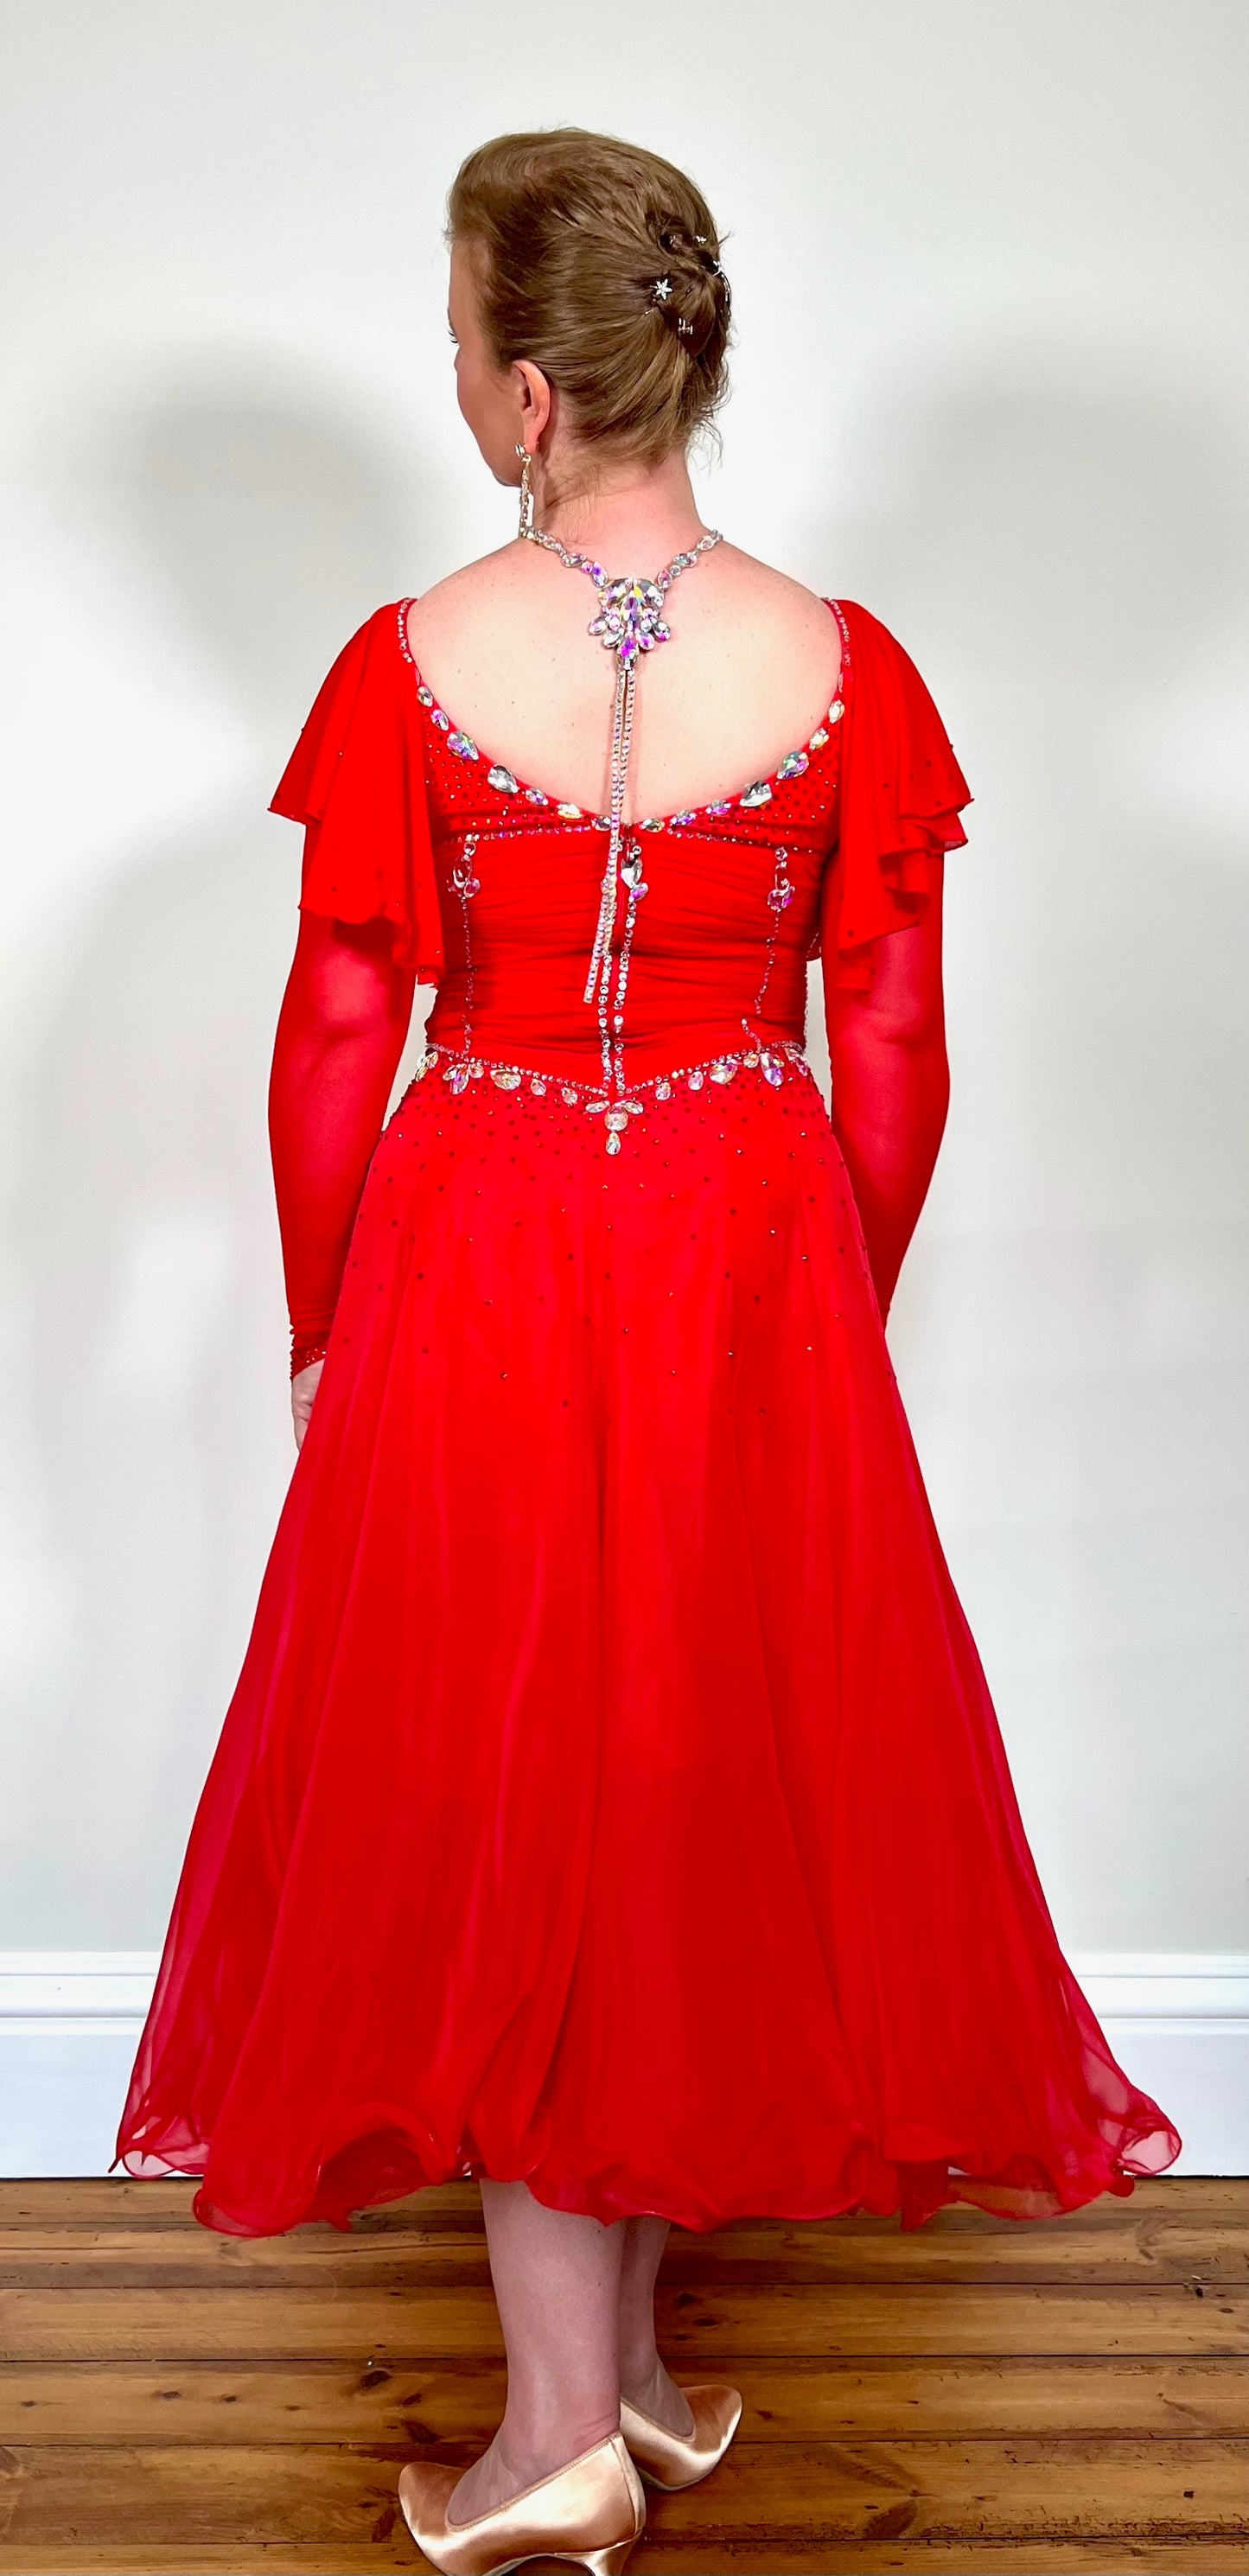 340 Red Rouched Bodice Ballroom Dress. Frill detail to top of sleeve with detachable ribbon floats. Detailed necklace. Decorated in Siam and AB stones.